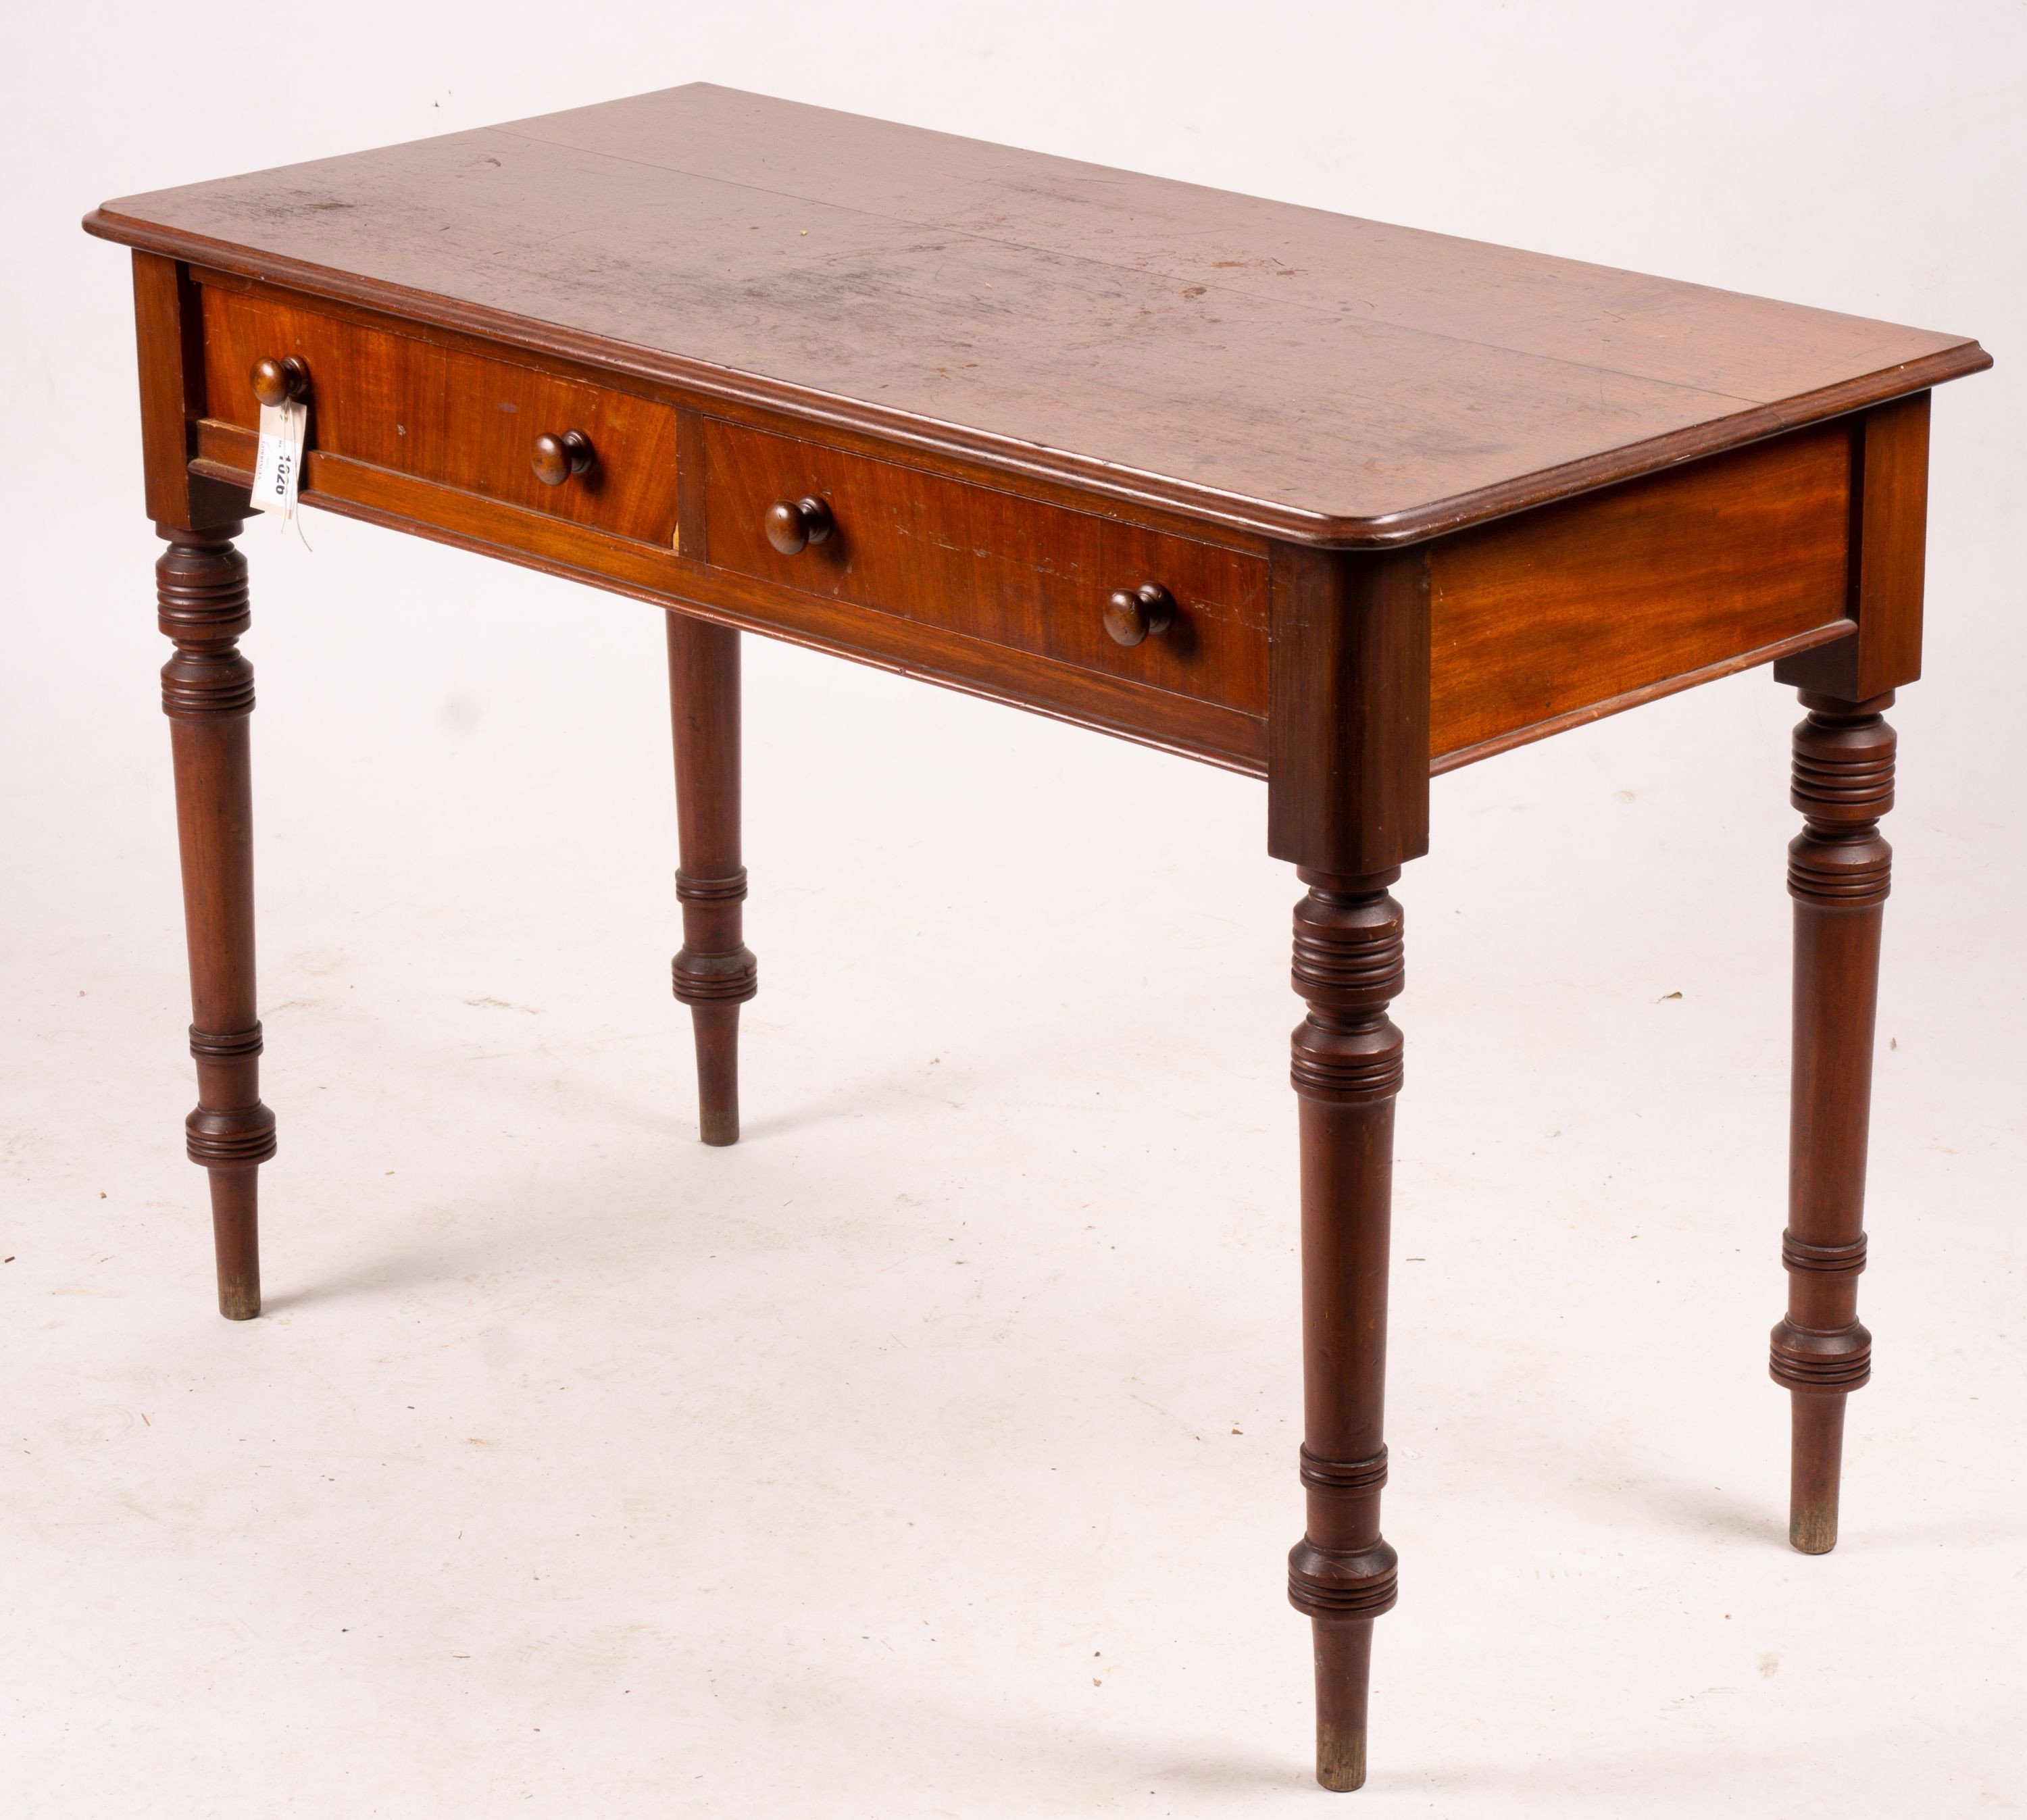 A Victorian mahogany two drawer side table, width 106cm, depth 52cm, height 73cm